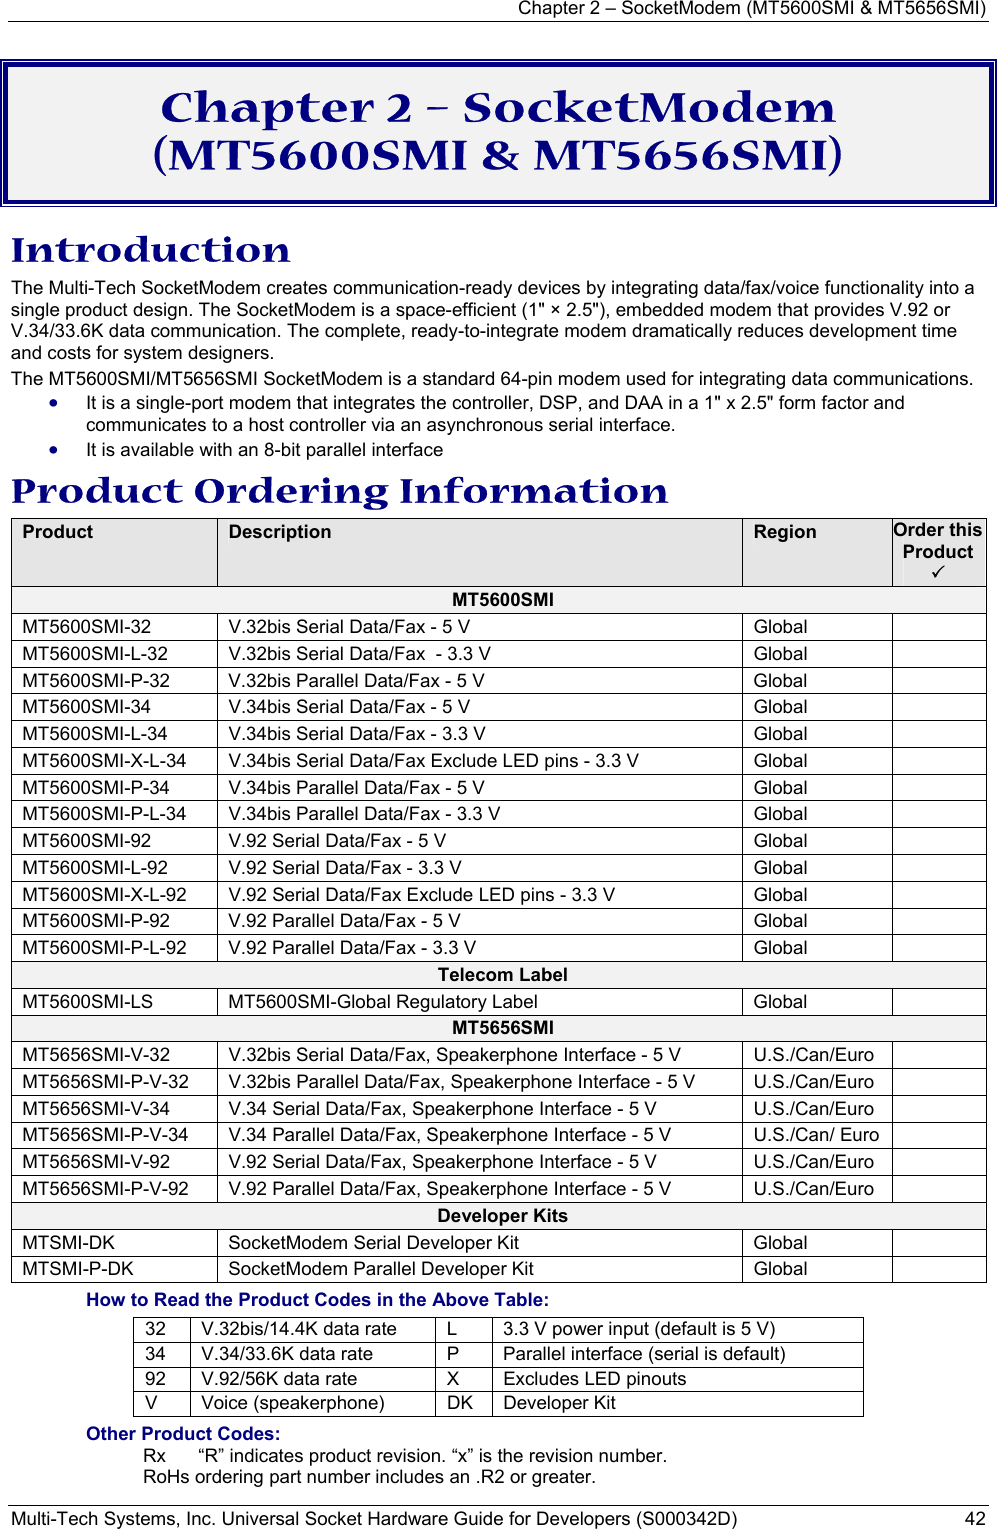 Chapter 2 – SocketModem (MT5600SMI &amp; MT5656SMI) Multi-Tech Systems, Inc. Universal Socket Hardware Guide for Developers (S000342D)  42 Chapter 2 – SocketModem (MT5600SMI &amp; MT5656SMI)  Introduction  The Multi-Tech SocketModem creates communication-ready devices by integrating data/fax/voice functionality into a single product design. The SocketModem is a space-efficient (1&quot; × 2.5&quot;), embedded modem that provides V.92 or V.34/33.6K data communication. The complete, ready-to-integrate modem dramatically reduces development time and costs for system designers.  The MT5600SMI/MT5656SMI SocketModem is a standard 64-pin modem used for integrating data communications.  • It is a single-port modem that integrates the controller, DSP, and DAA in a 1&quot; x 2.5&quot; form factor and communicates to a host controller via an asynchronous serial interface. • It is available with an 8-bit parallel interface Product Ordering Information Product  Description  Region  Order this Product 3 MT5600SMI MT5600SMI-32  V.32bis Serial Data/Fax - 5 V             Global   MT5600SMI-L-32  V.32bis Serial Data/Fax  - 3.3 V           Global   MT5600SMI-P-32  V.32bis Parallel Data/Fax - 5 V            Global   MT5600SMI-34  V.34bis Serial Data/Fax - 5 V             Global   MT5600SMI-L-34  V.34bis Serial Data/Fax - 3.3 V           Global   MT5600SMI-X-L-34  V.34bis Serial Data/Fax Exclude LED pins - 3.3 V   Global   MT5600SMI-P-34  V.34bis Parallel Data/Fax - 5 V           Global   MT5600SMI-P-L-34  V.34bis Parallel Data/Fax - 3.3 V           Global   MT5600SMI-92  V.92 Serial Data/Fax - 5 V              Global   MT5600SMI-L-92  V.92 Serial Data/Fax - 3.3 V             Global   MT5600SMI-X-L-92  V.92 Serial Data/Fax Exclude LED pins - 3.3 V     Global   MT5600SMI-P-92  V.92 Parallel Data/Fax - 5 V             Global   MT5600SMI-P-L-92  V.92 Parallel Data/Fax - 3.3 V             Global   Telecom Label MT5600SMI-LS  MT5600SMI-Global Regulatory Label  Global   MT5656SMI MT5656SMI-V-32  V.32bis Serial Data/Fax, Speakerphone Interface - 5 V  U.S./Can/Euro   MT5656SMI-P-V-32  V.32bis Parallel Data/Fax, Speakerphone Interface - 5 V   U.S./Can/Euro   MT5656SMI-V-34  V.34 Serial Data/Fax, Speakerphone Interface - 5 V  U.S./Can/Euro   MT5656SMI-P-V-34  V.34 Parallel Data/Fax, Speakerphone Interface - 5 V  U.S./Can/ Euro   MT5656SMI-V-92  V.92 Serial Data/Fax, Speakerphone Interface - 5 V  U.S./Can/Euro   MT5656SMI-P-V-92  V.92 Parallel Data/Fax, Speakerphone Interface - 5 V  U.S./Can/Euro   Developer Kits MTSMI-DK SocketModem Serial Developer Kit  Global   MTSMI-P-DK  SocketModem Parallel Developer Kit  Global   How to Read the Product Codes in the Above Table: 32  V.32bis/14.4K data rate  L  3.3 V power input (default is 5 V) 34  V.34/33.6K data rate  P  Parallel interface (serial is default) 92  V.92/56K data rate  X  Excludes LED pinouts V  Voice (speakerphone)  DK  Developer Kit Other Product Codes: Rx  “R” indicates product revision. “x” is the revision number. RoHs ordering part number includes an .R2 or greater. 